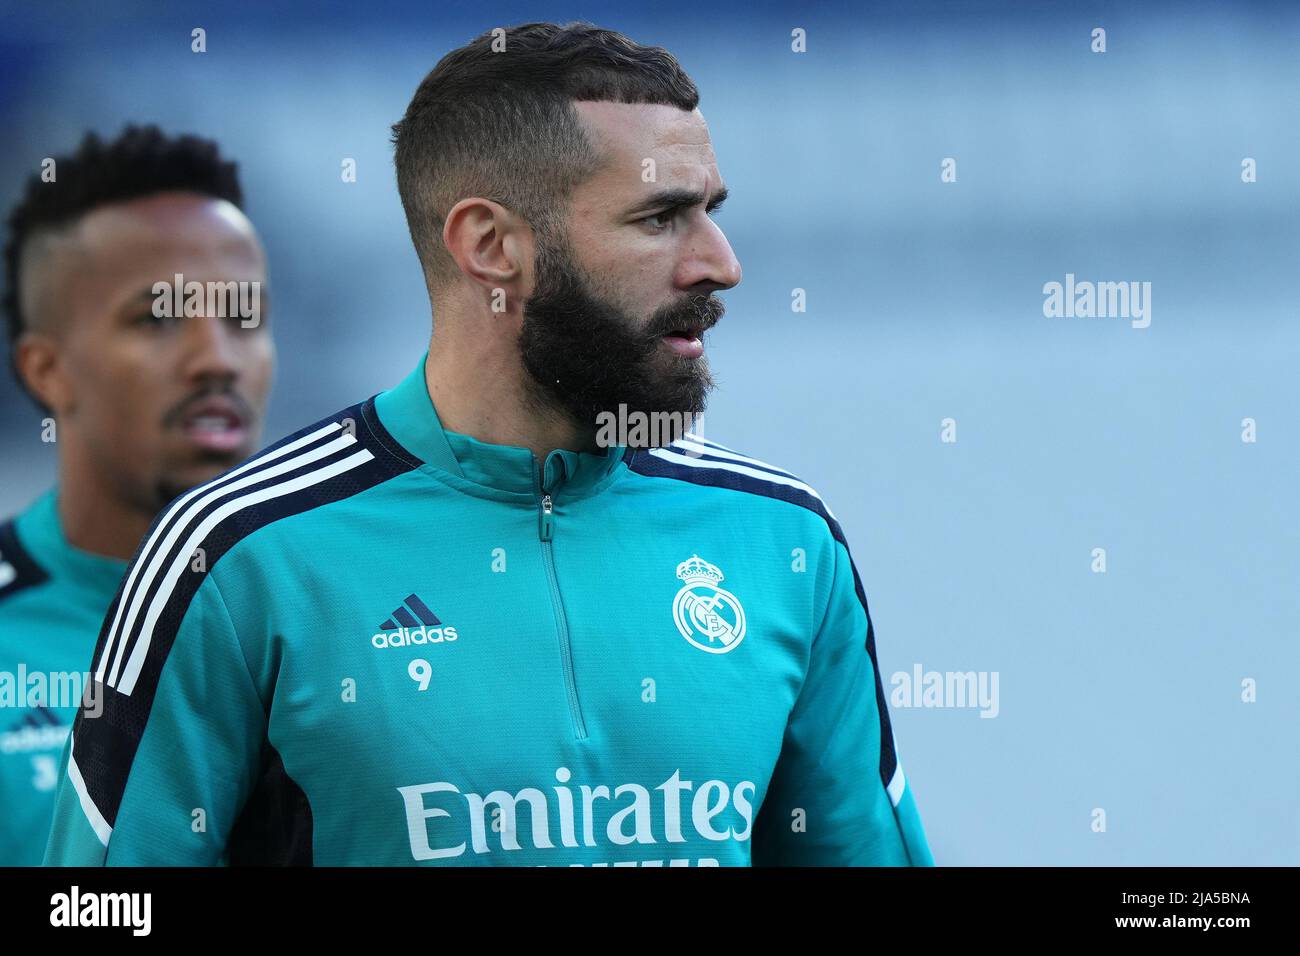 Saint Denis, France. 27th May, 2022. Karim Benzema of Real Madrid CF during  training session at Stade de France on May 27, 2022 in Paris, France.  Liverpool will face Real Madrid in